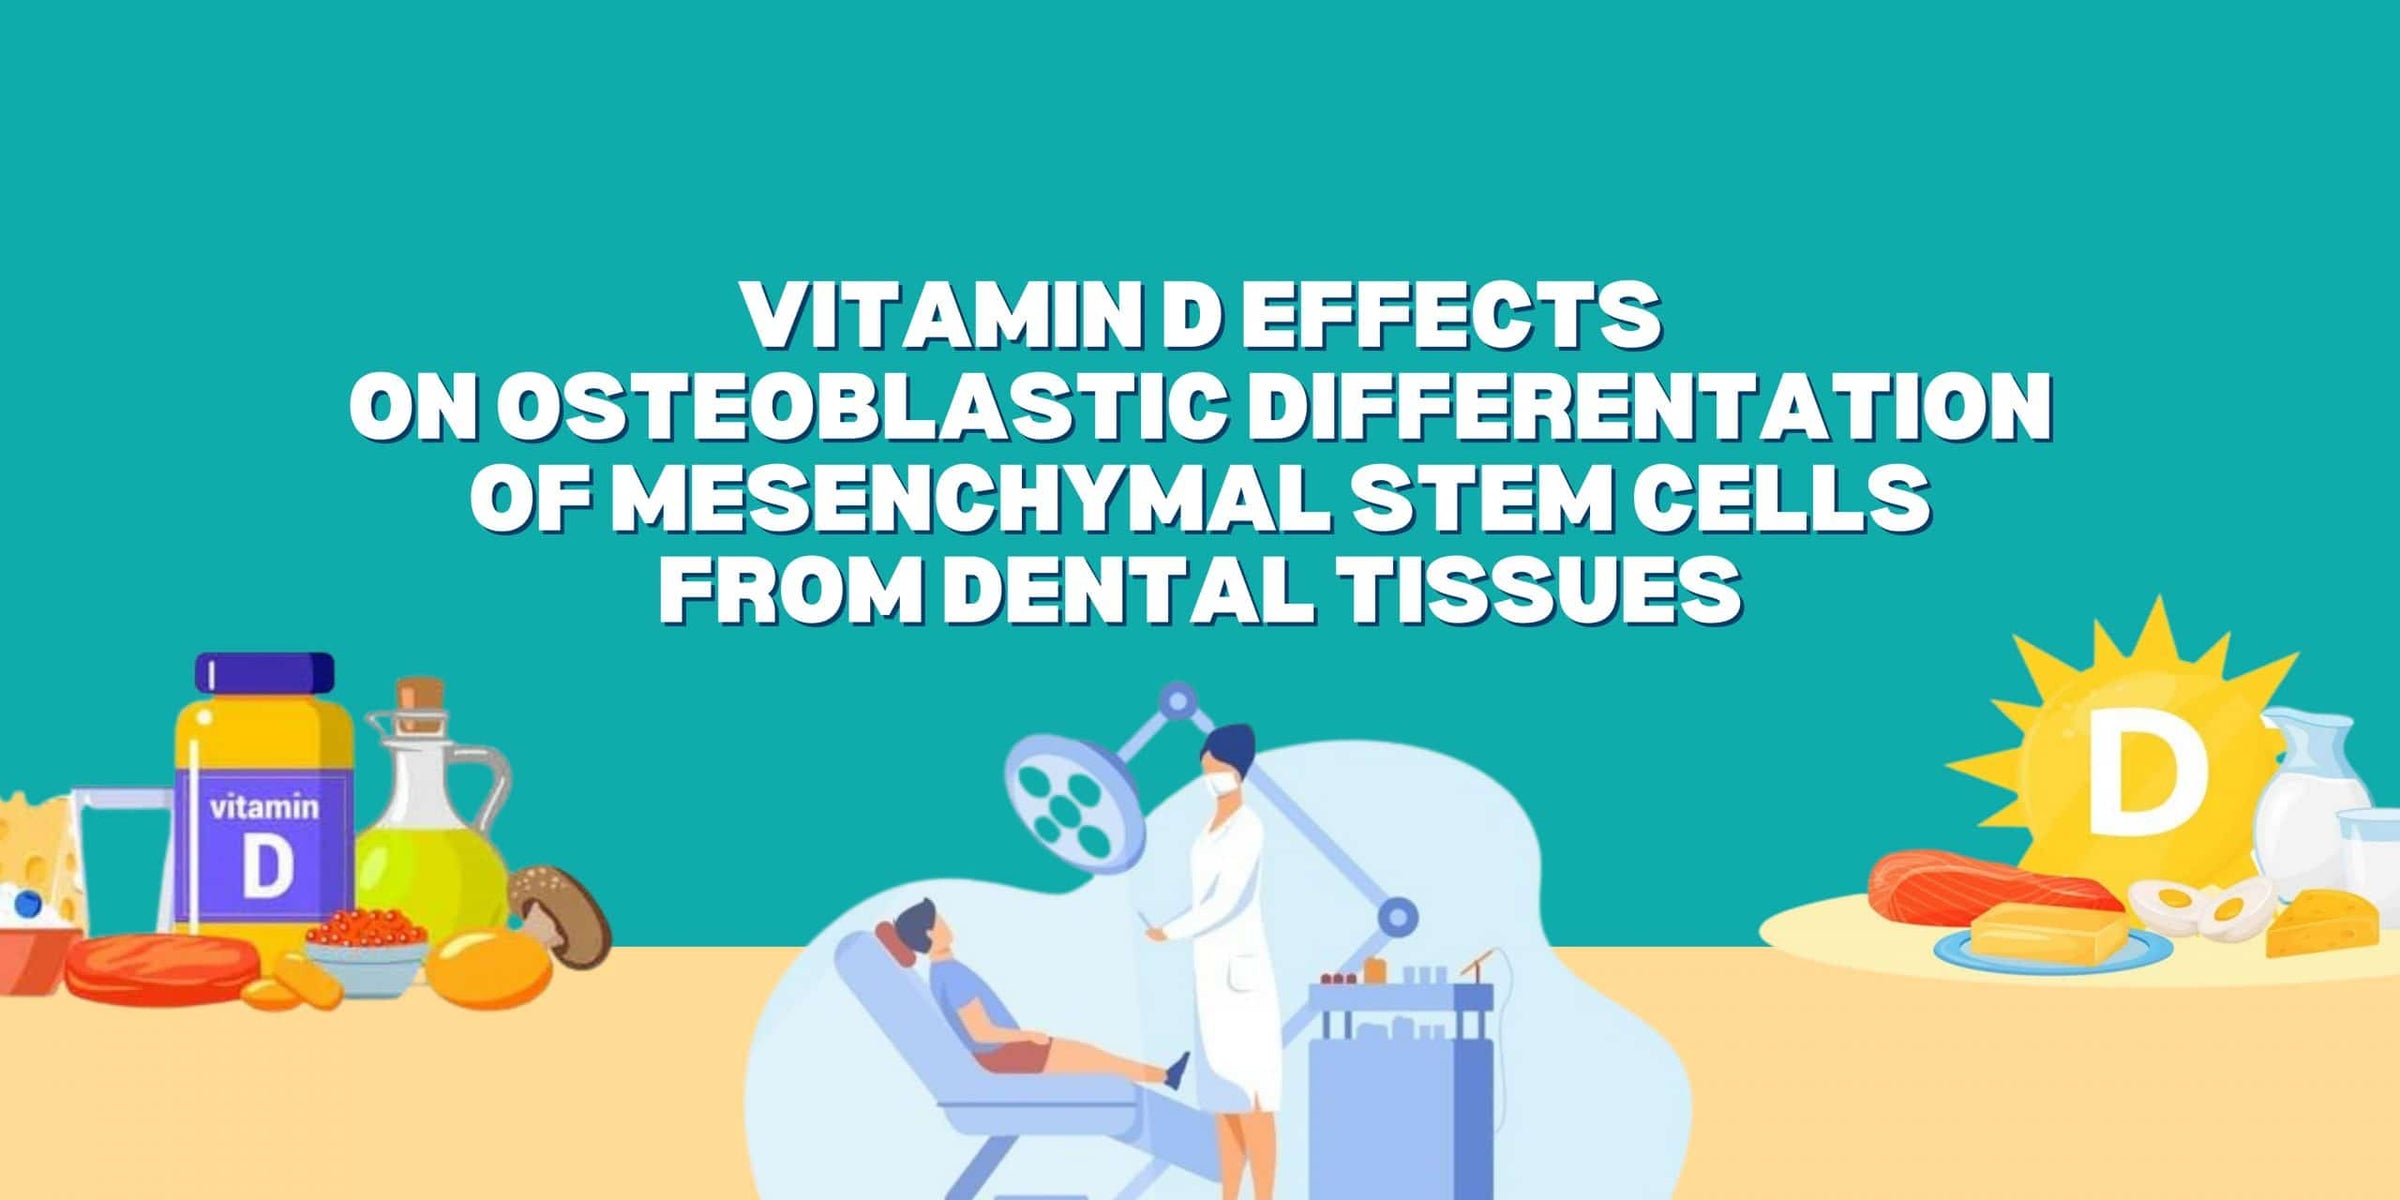 Vitamin D Effects on Osteoblastic Differentiation of Mesenchymal Stem Cells from Dental Tissues Image